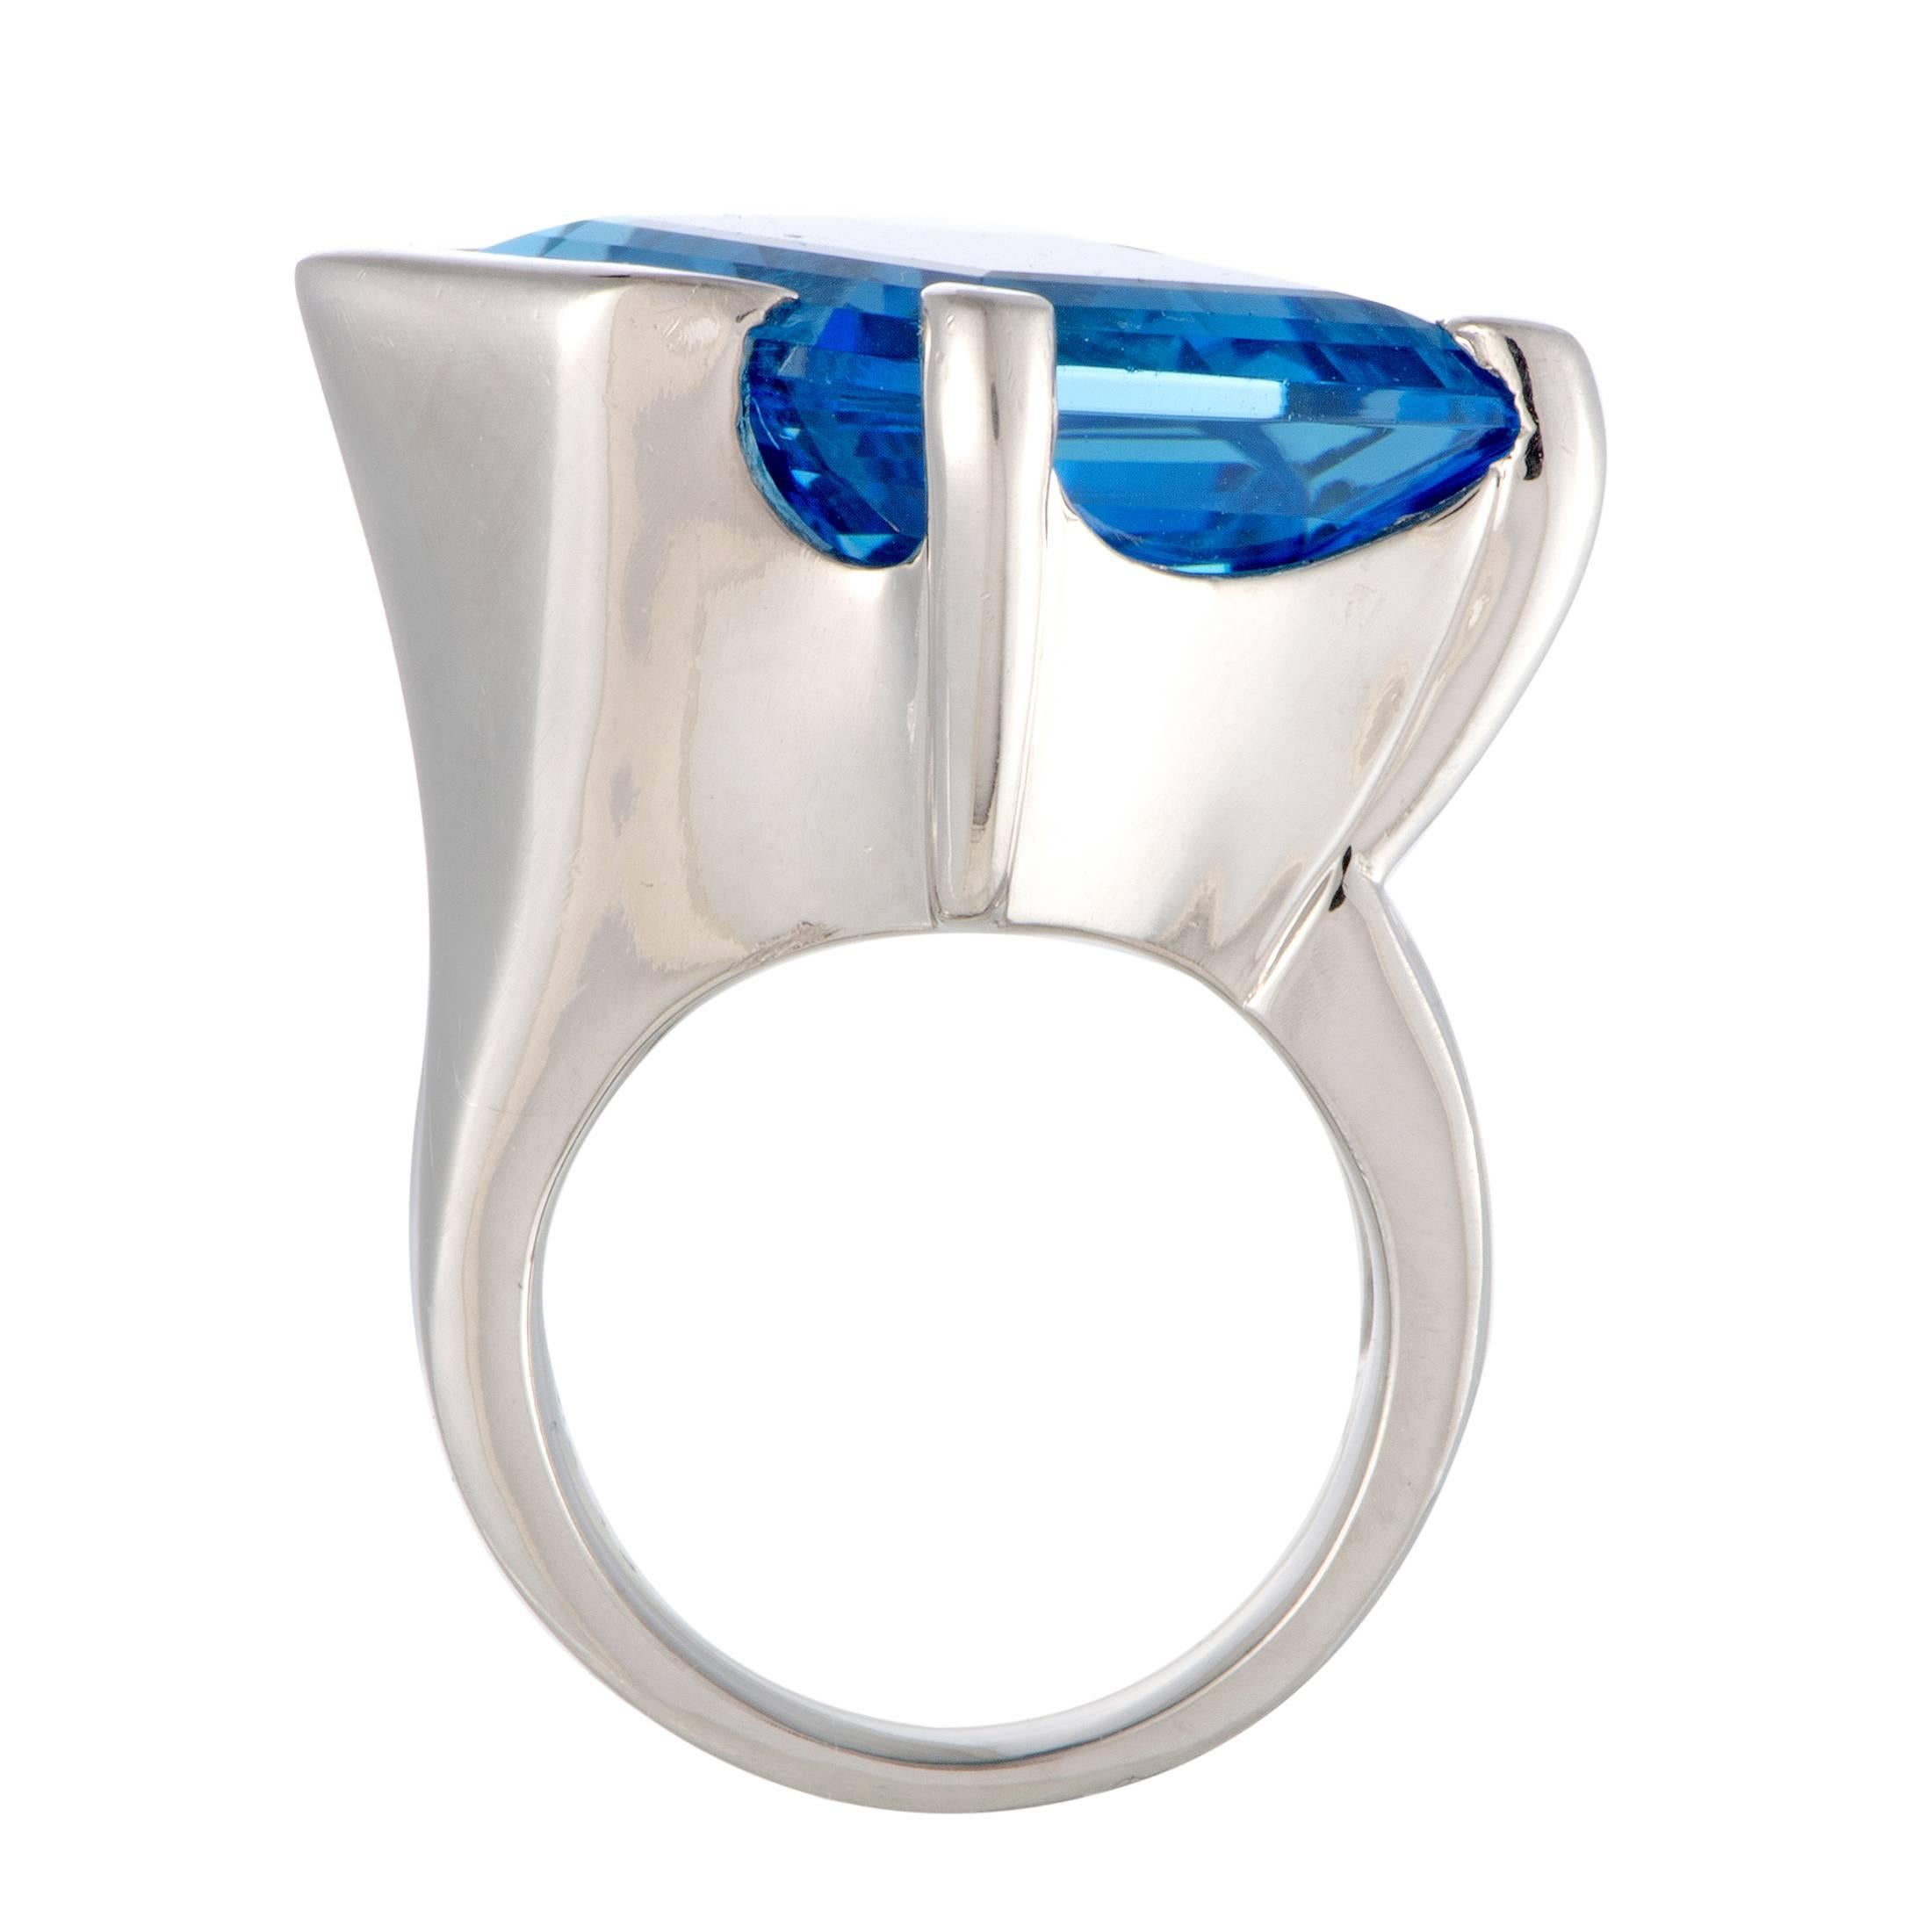 The ingeniously cut topaz steals the show in this stunning ring that offers an exceptionally eye-catching, fashionable look. The ring is made of elegant platinum and weighs 43.7 grams, and the topaz weighs 42.19 carats.
Ring Size: 7
Ring Top